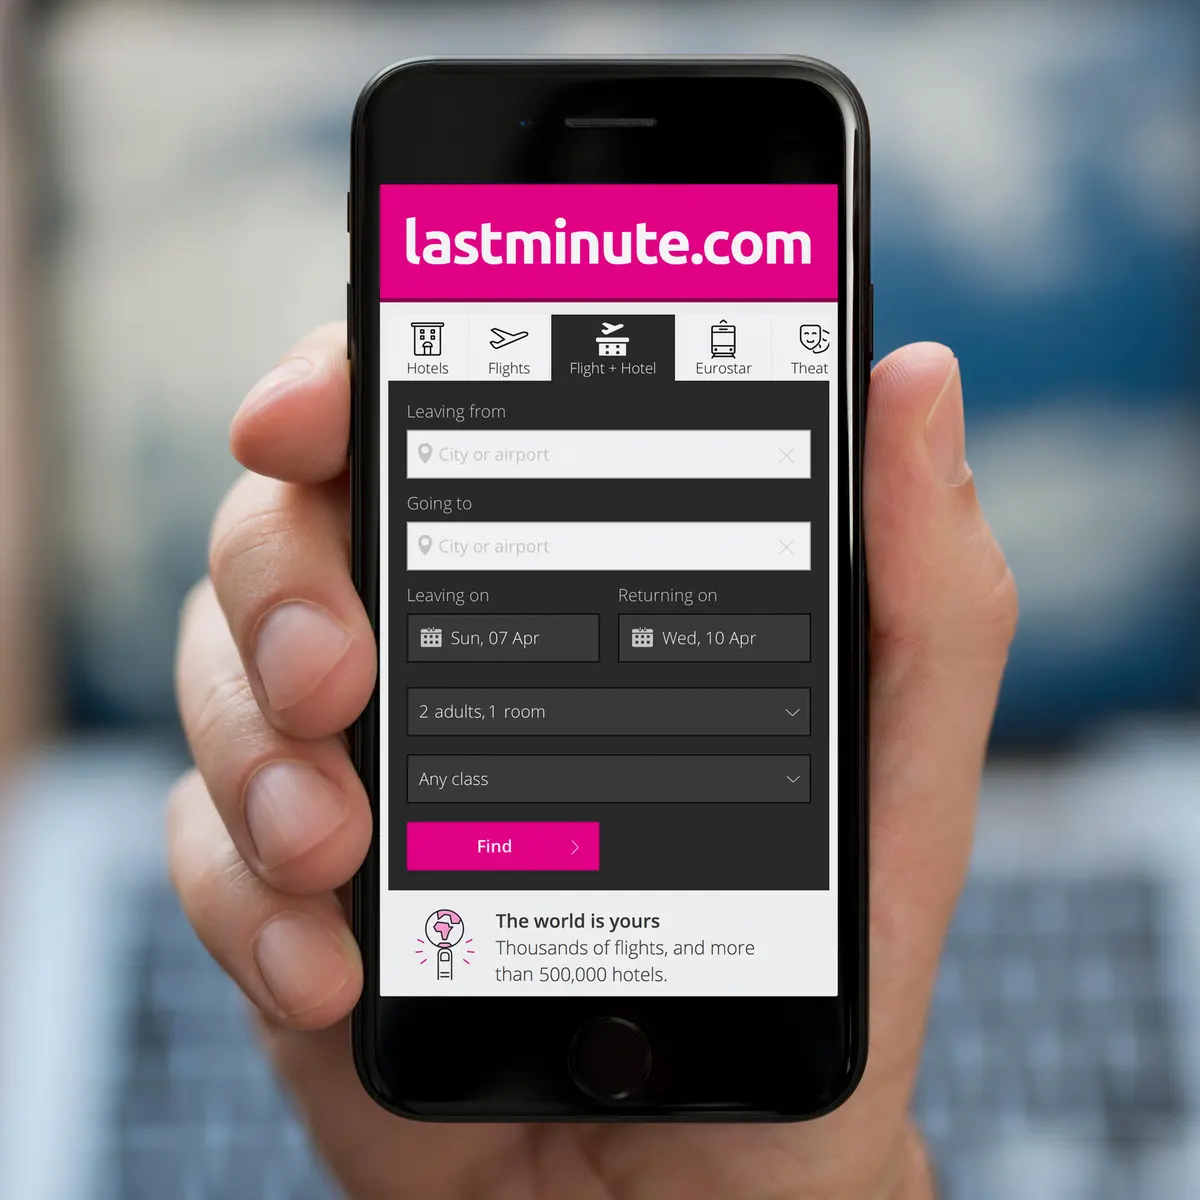 Lastminute.com €100 Gift Card IE